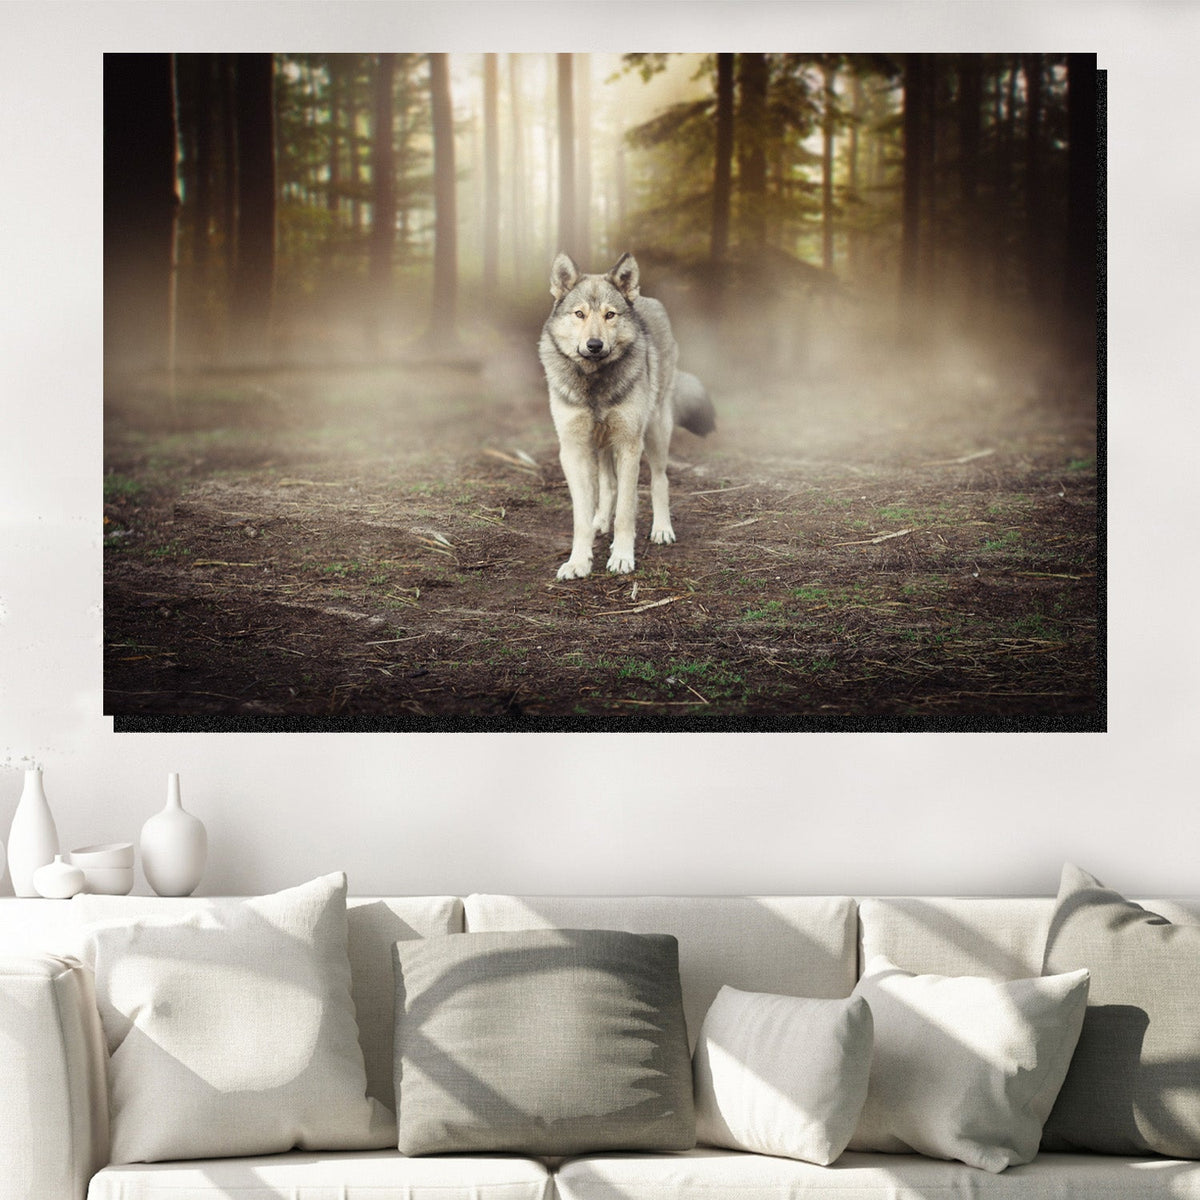 https://cdn.shopify.com/s/files/1/0387/9986/8044/products/ForestWolfCanvasArtprintStretched-4.jpg